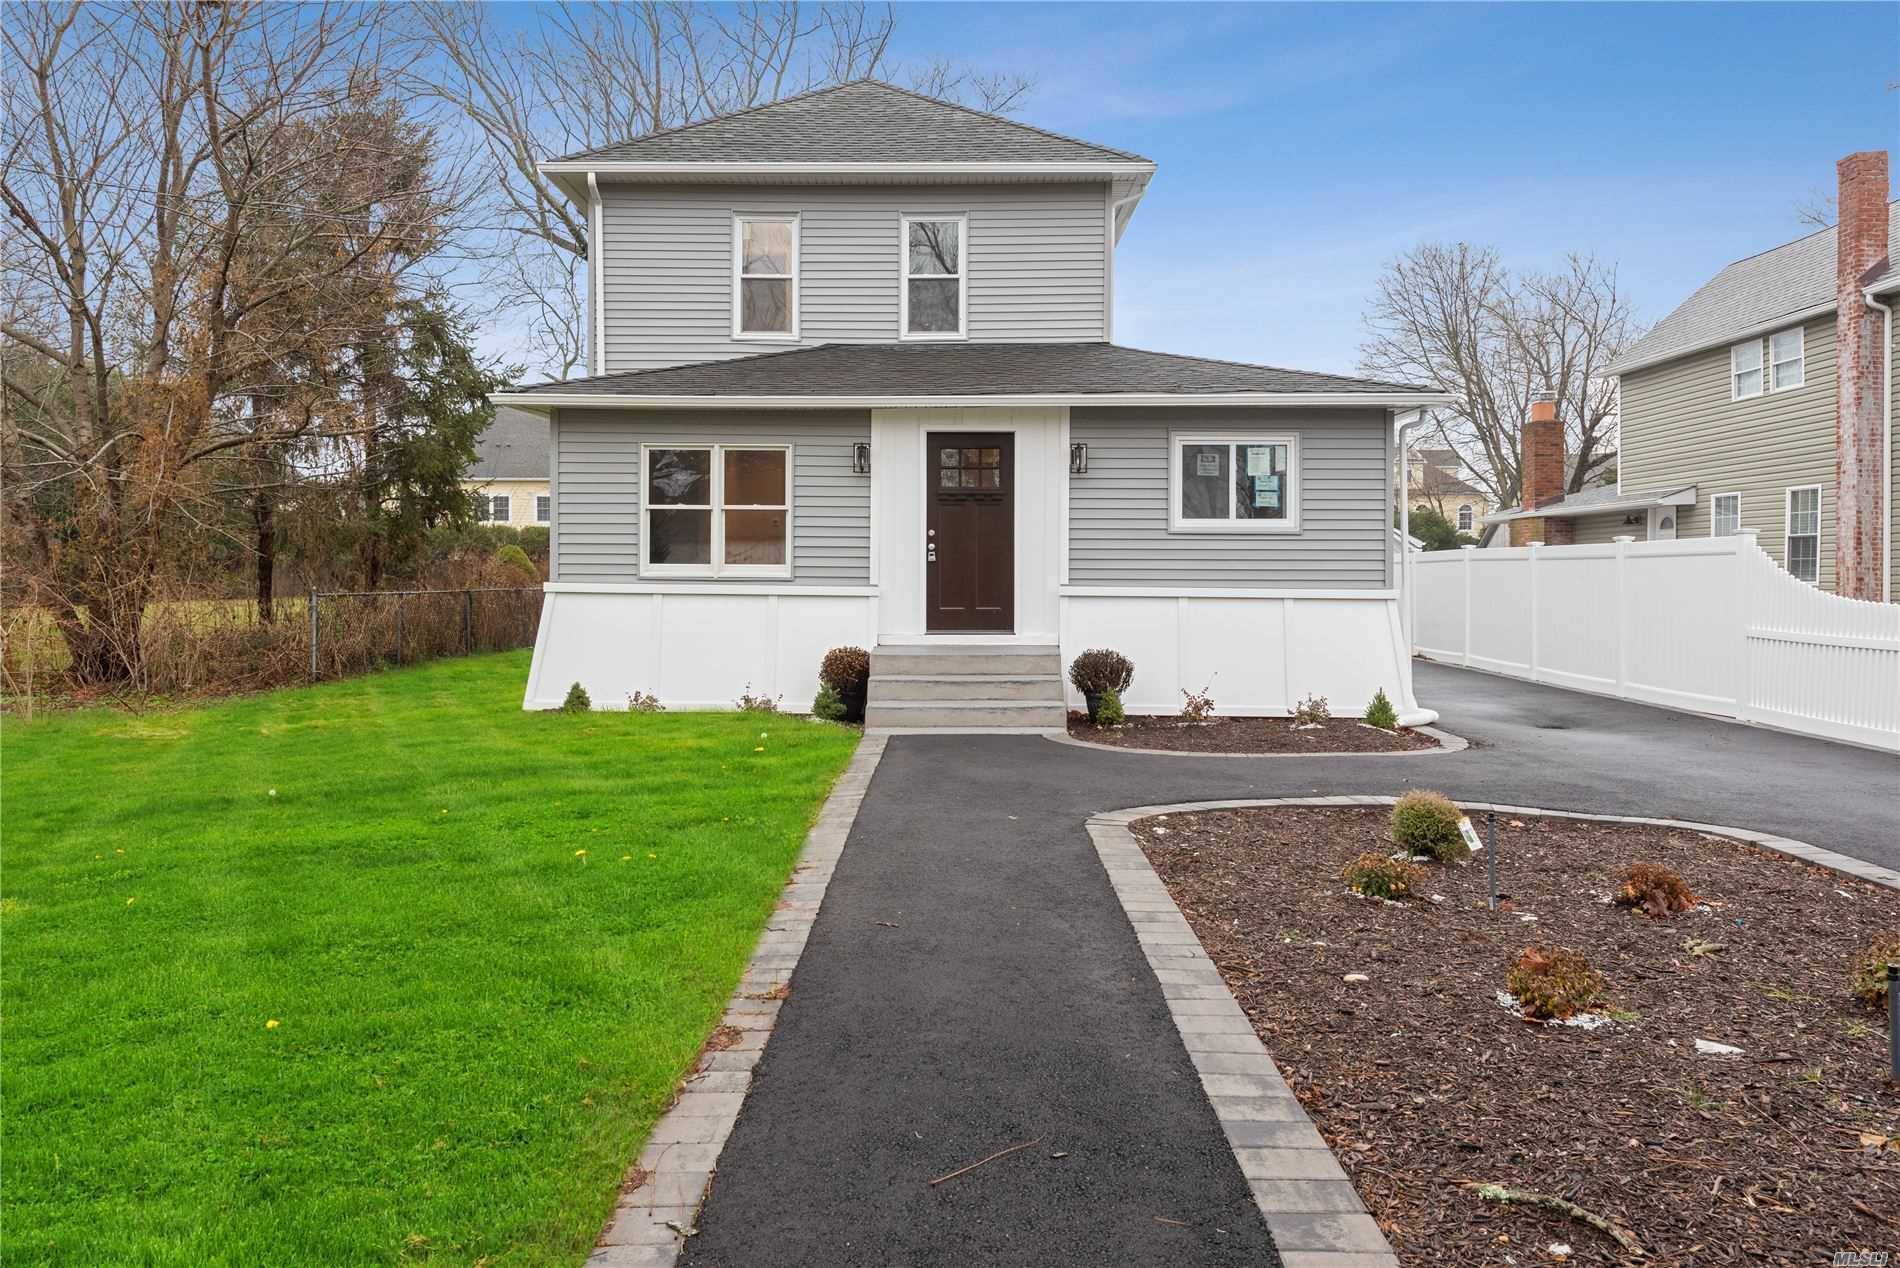 Stunning Renovated Colonial With Classic Charm In The Heart Of Patchogue Village.